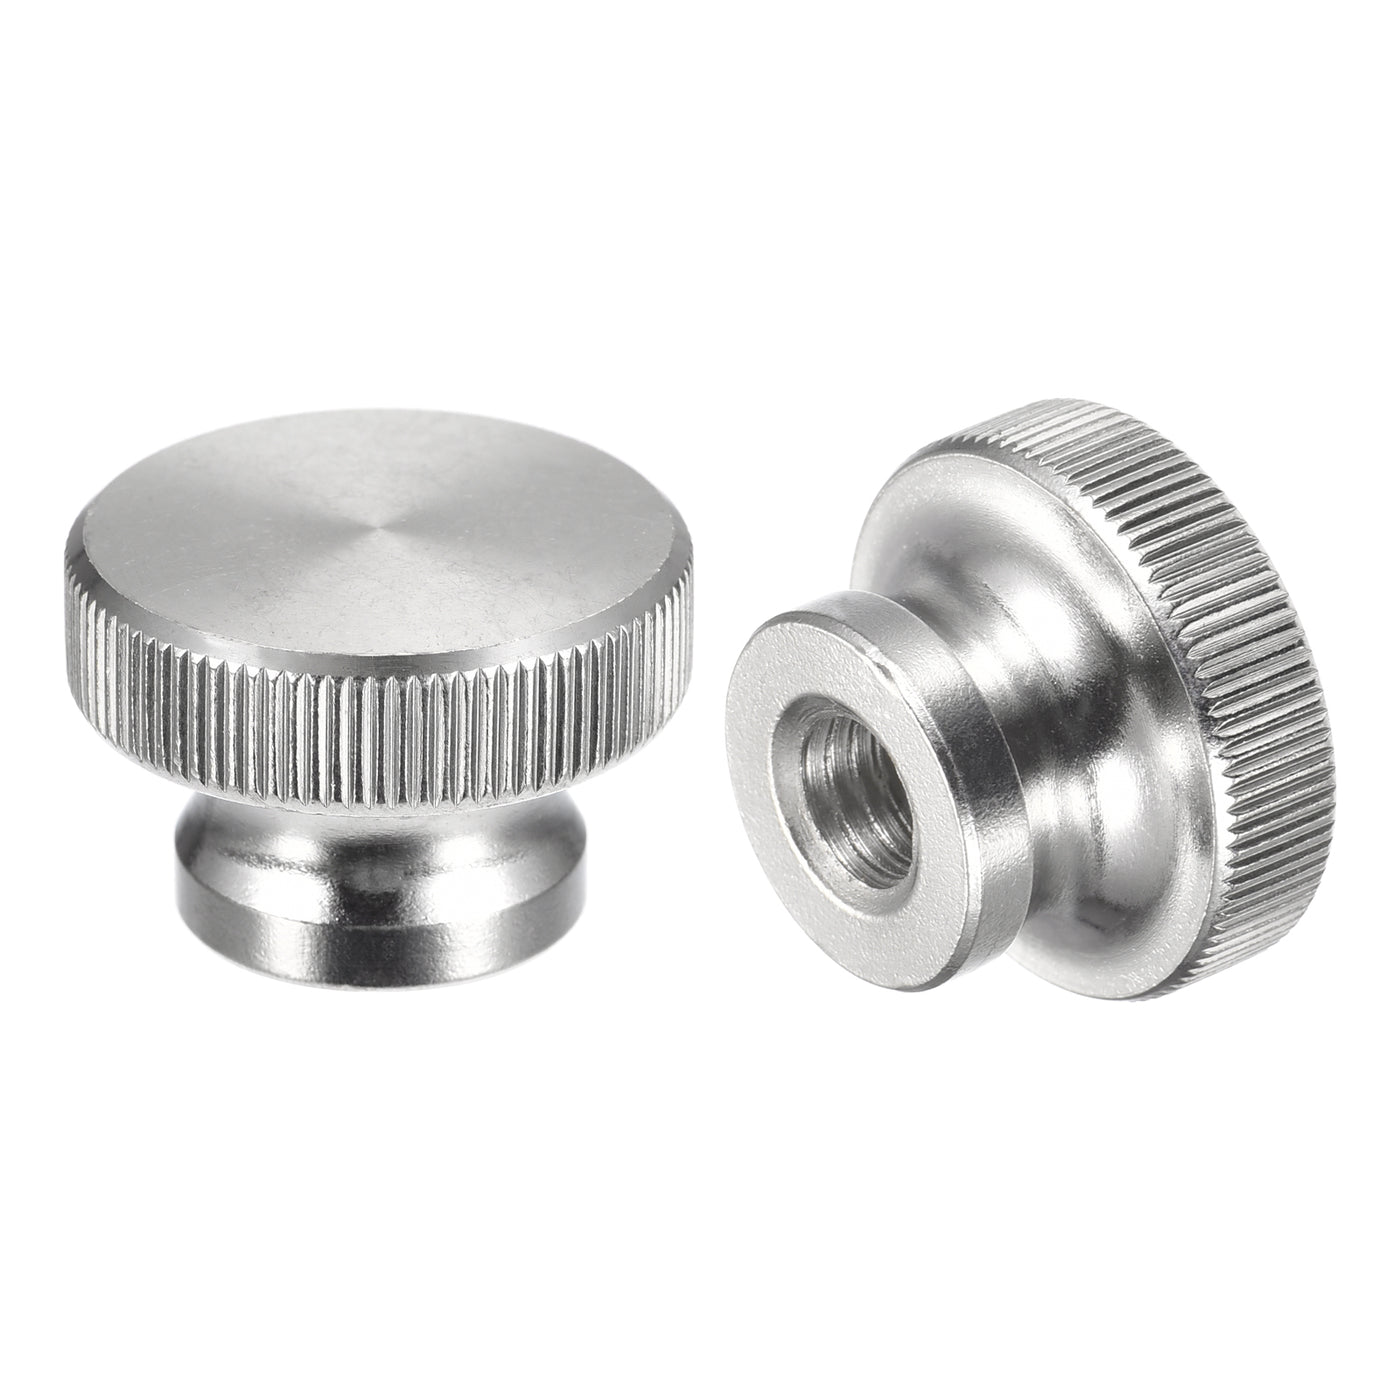 uxcell Uxcell Knurled Thumb Nuts, 4pcs M10 x D30mm x H20mm 304 Stainless Steel Blind Hole Nuts